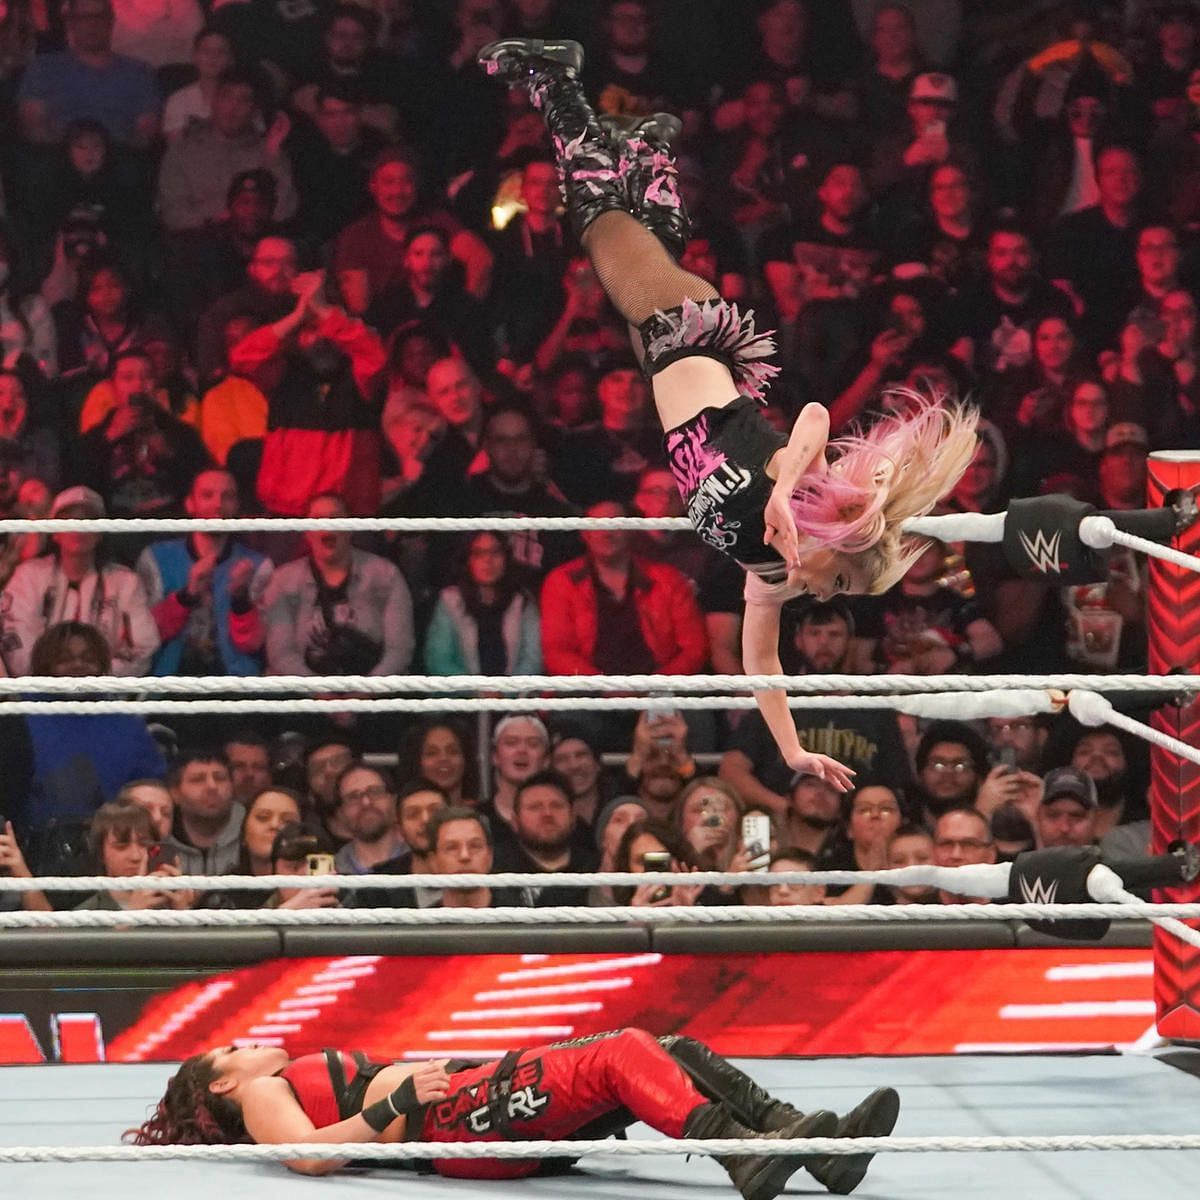 Alexa Bliss scored a massive pinfall victory over Bayley.